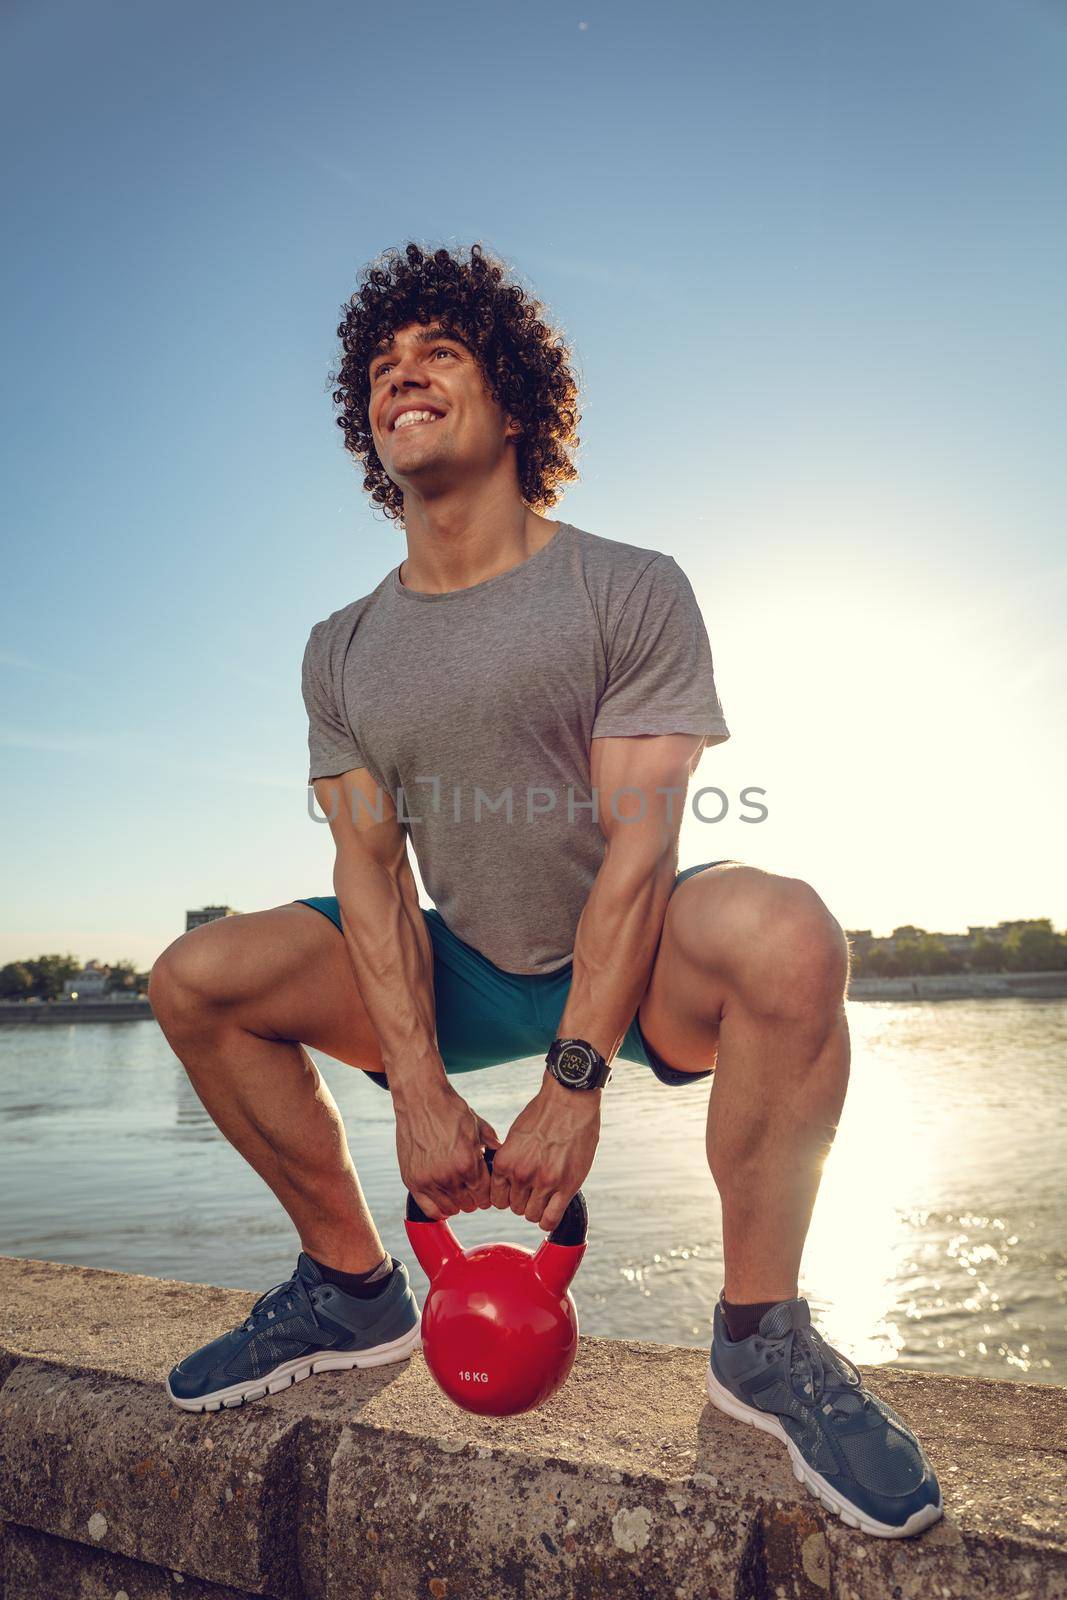 Bodybuilder is crouching and doing strong fit body training with kettlebell on the wall, near the river against blue sky with sunrise light.